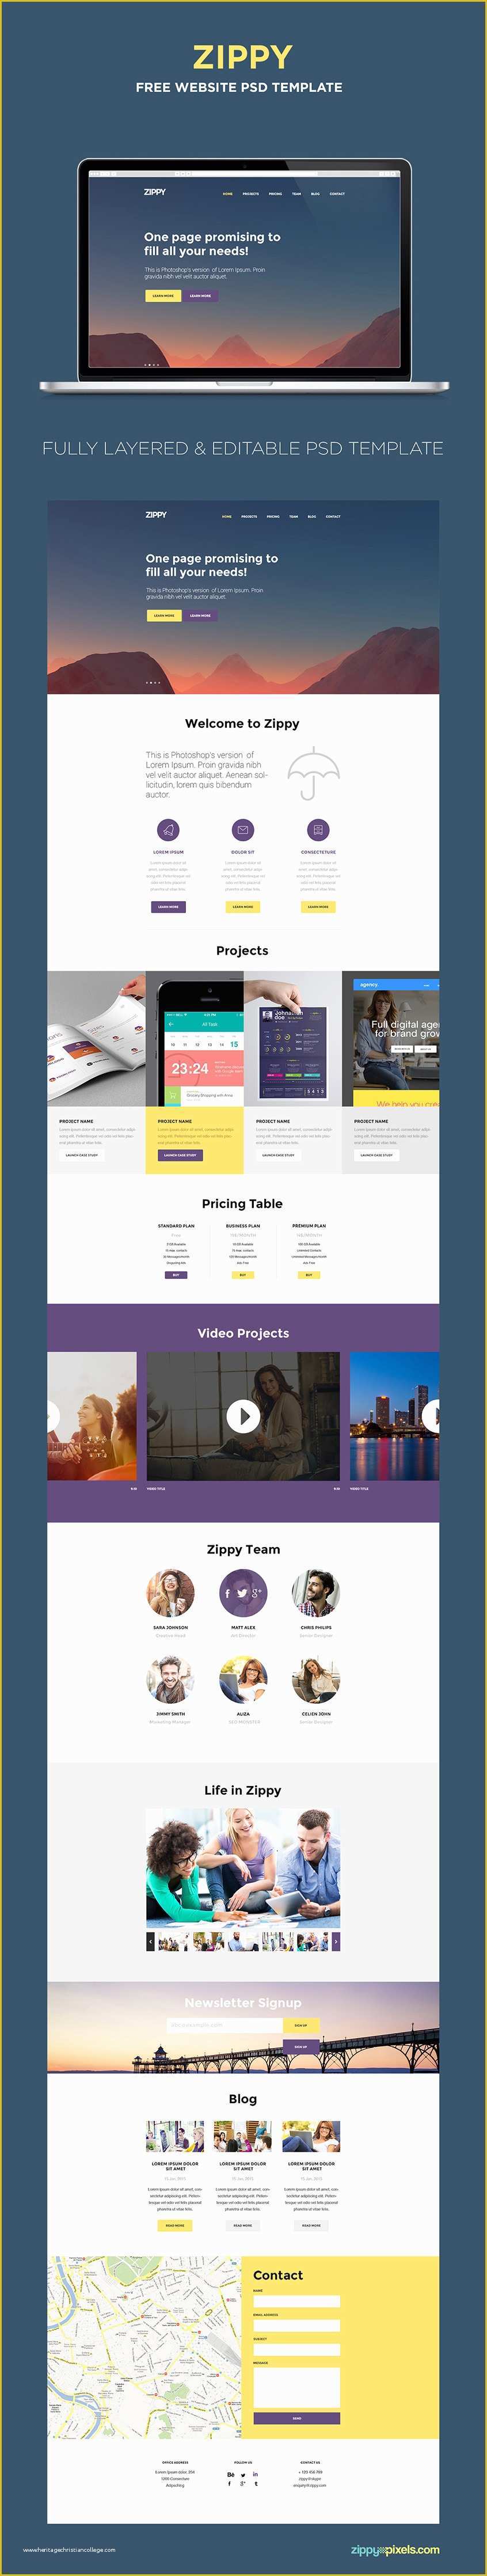 Single Page Website Template Free Of Free E Page Website Template Psd